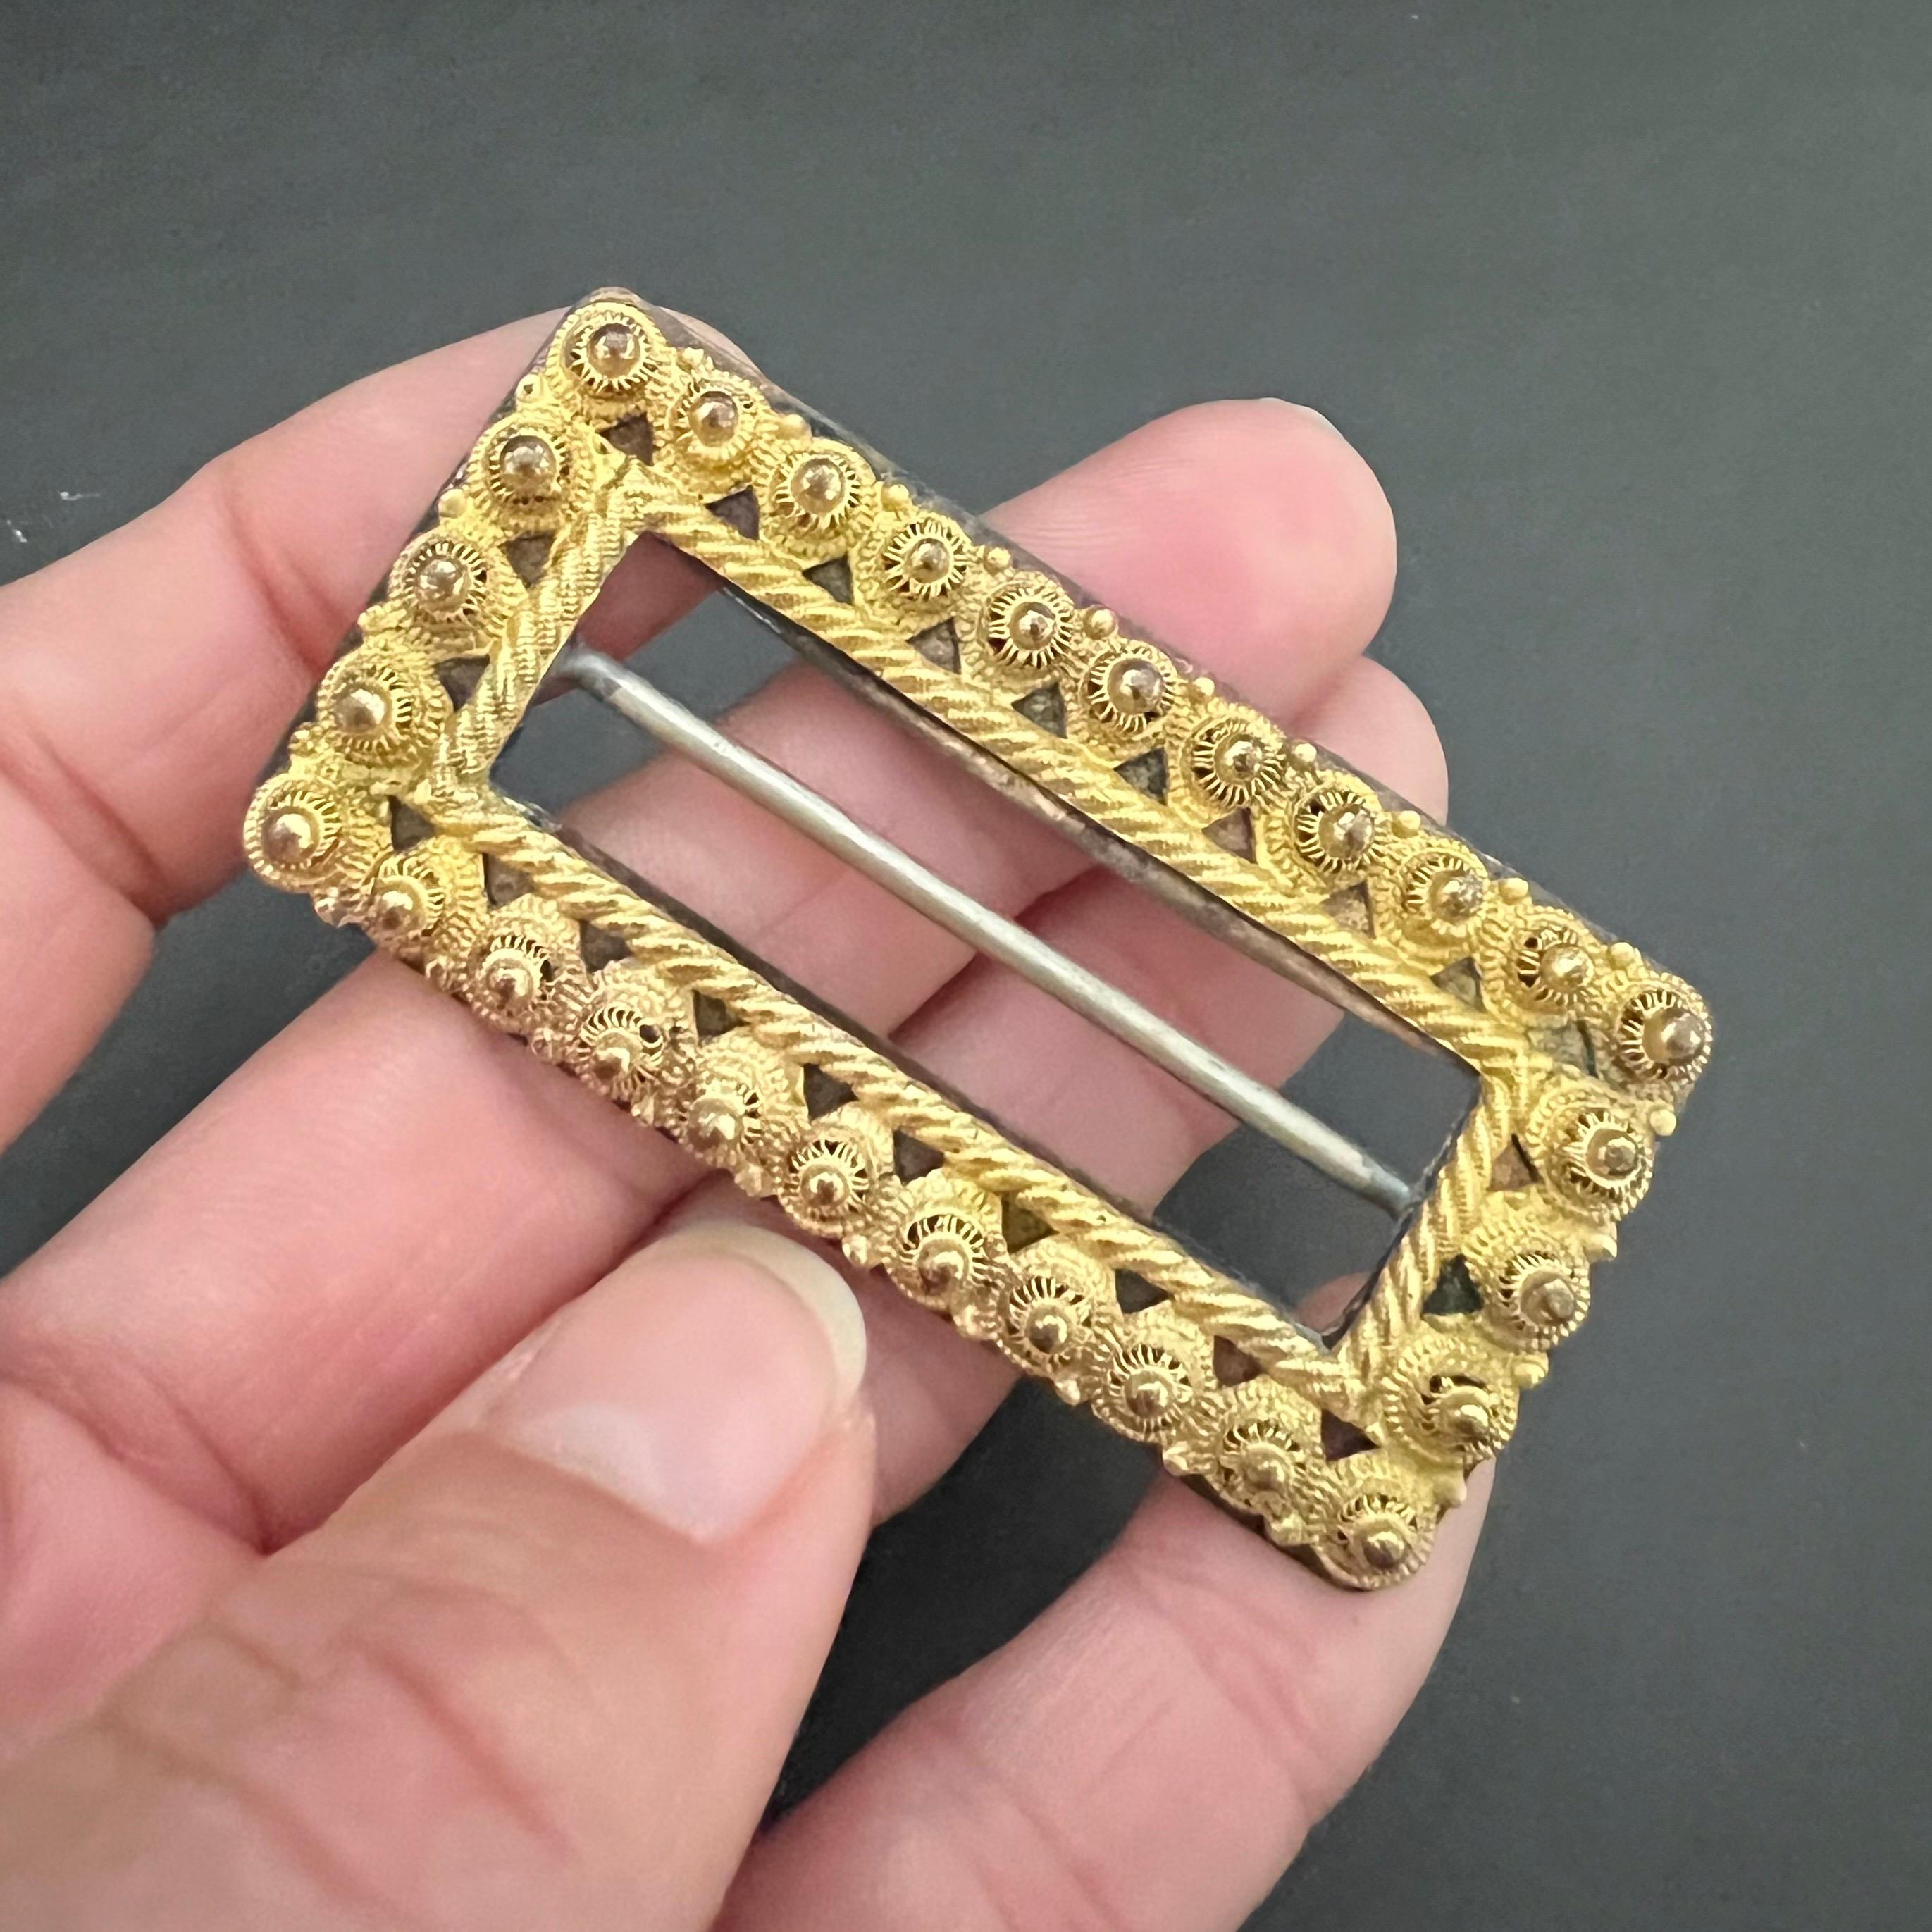 This antique 19th century filigree belt buckle is made of 10 karat yellow gold. The rectangular-shaped buckle is embellished with filigree knots and a rope motif. The top of the belt buckle is made of 10 karat yellow gold and the frame of the buckle